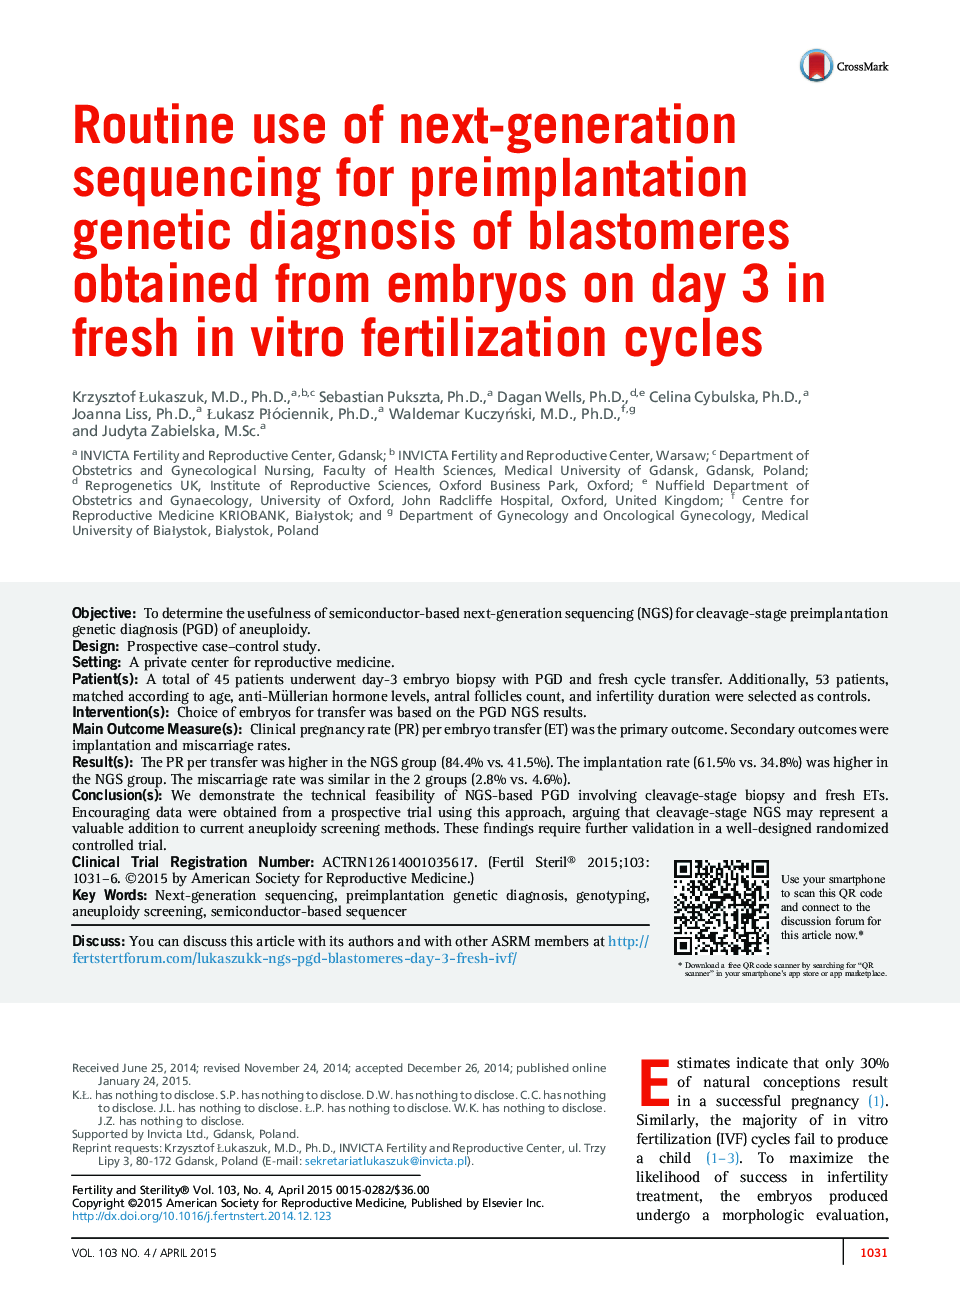 Routine use of next-generation sequencing for preimplantation genetic diagnosis of blastomeres obtained from embryos on day 3 in fresh inÂ vitro fertilization cycles